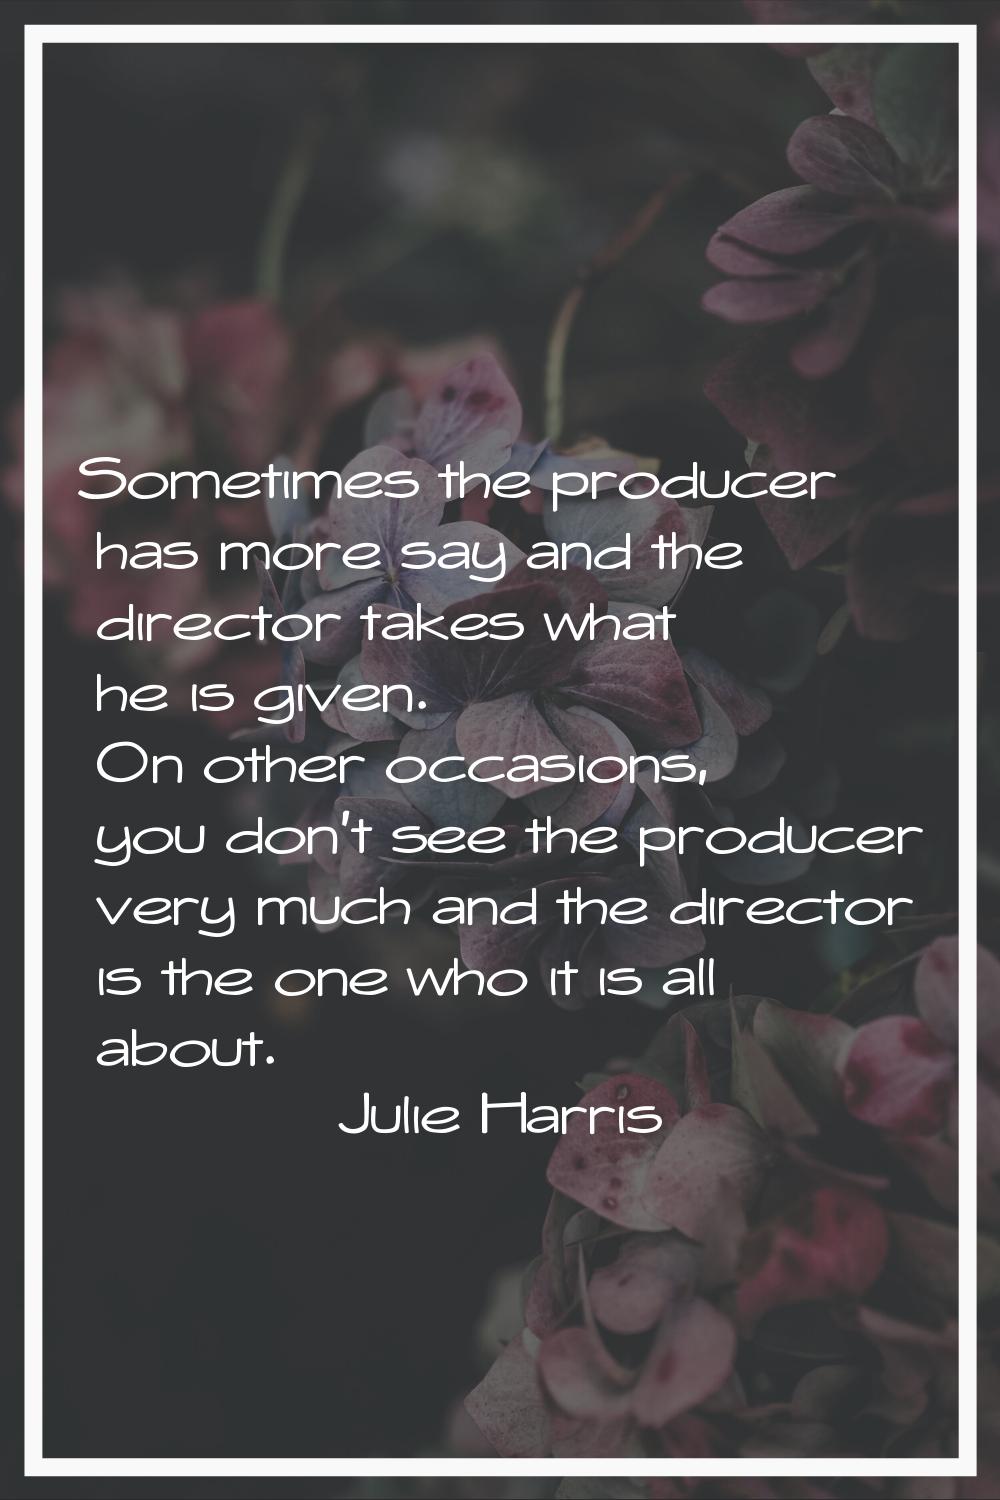 Sometimes the producer has more say and the director takes what he is given. On other occasions, yo